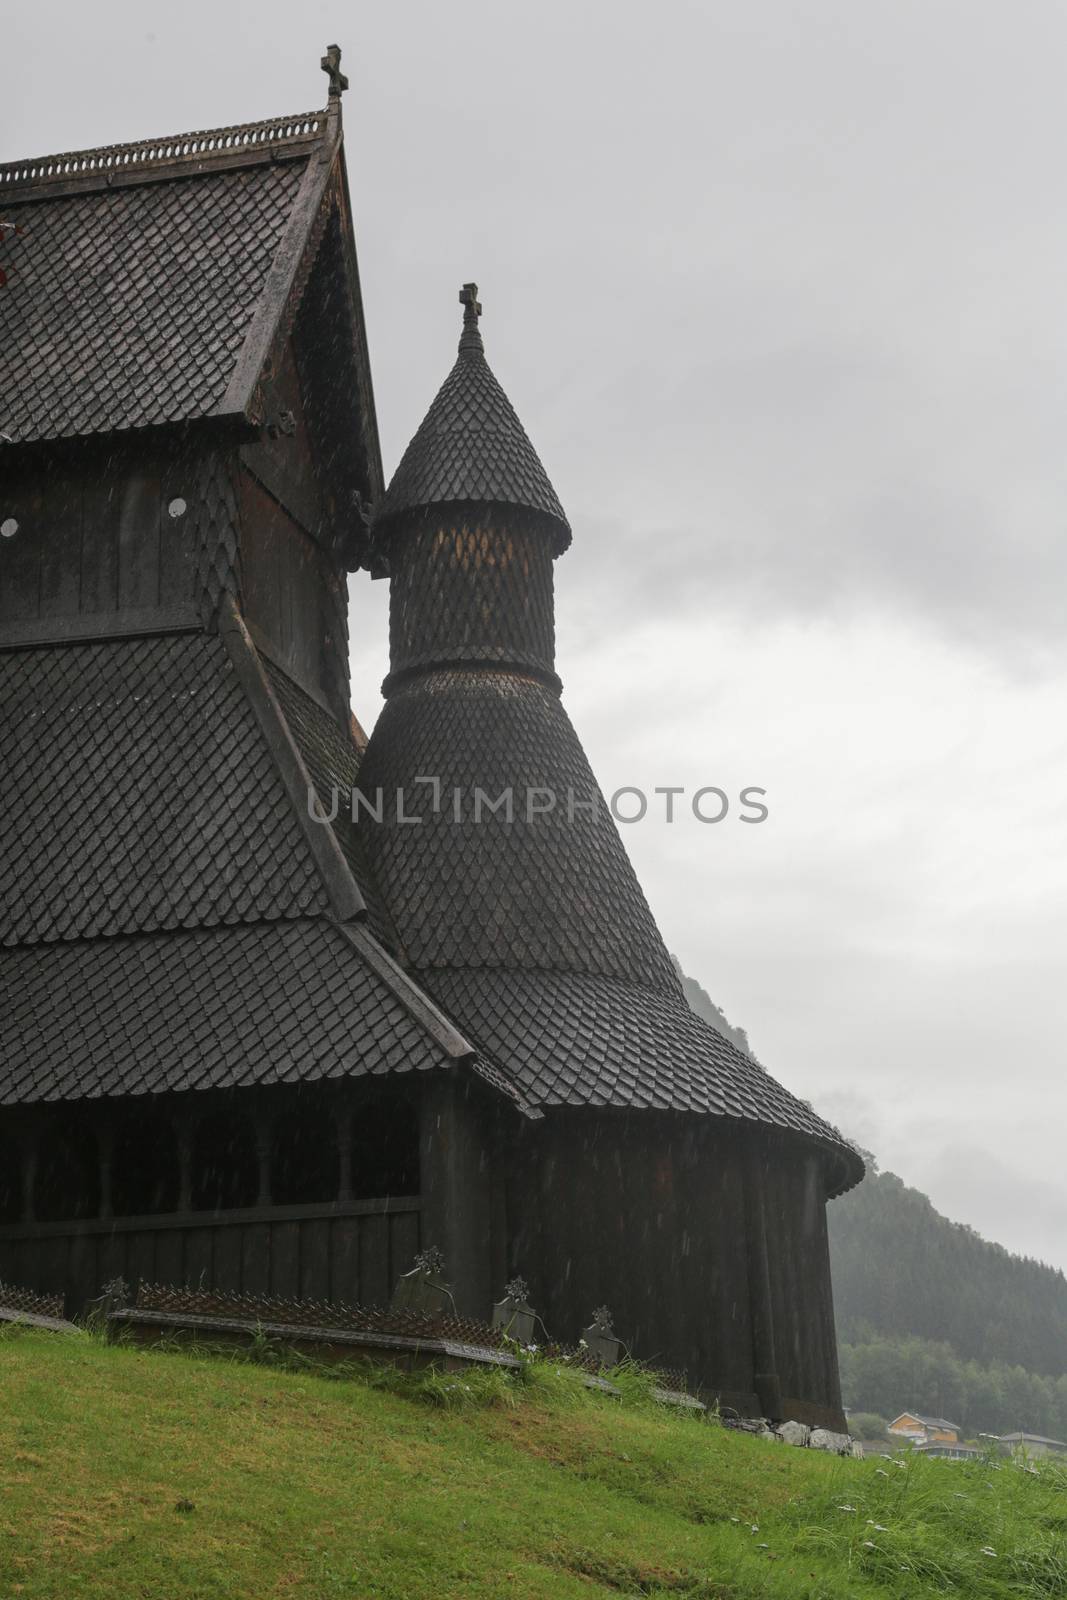 The Hopperstad stave church near Vik in Norway